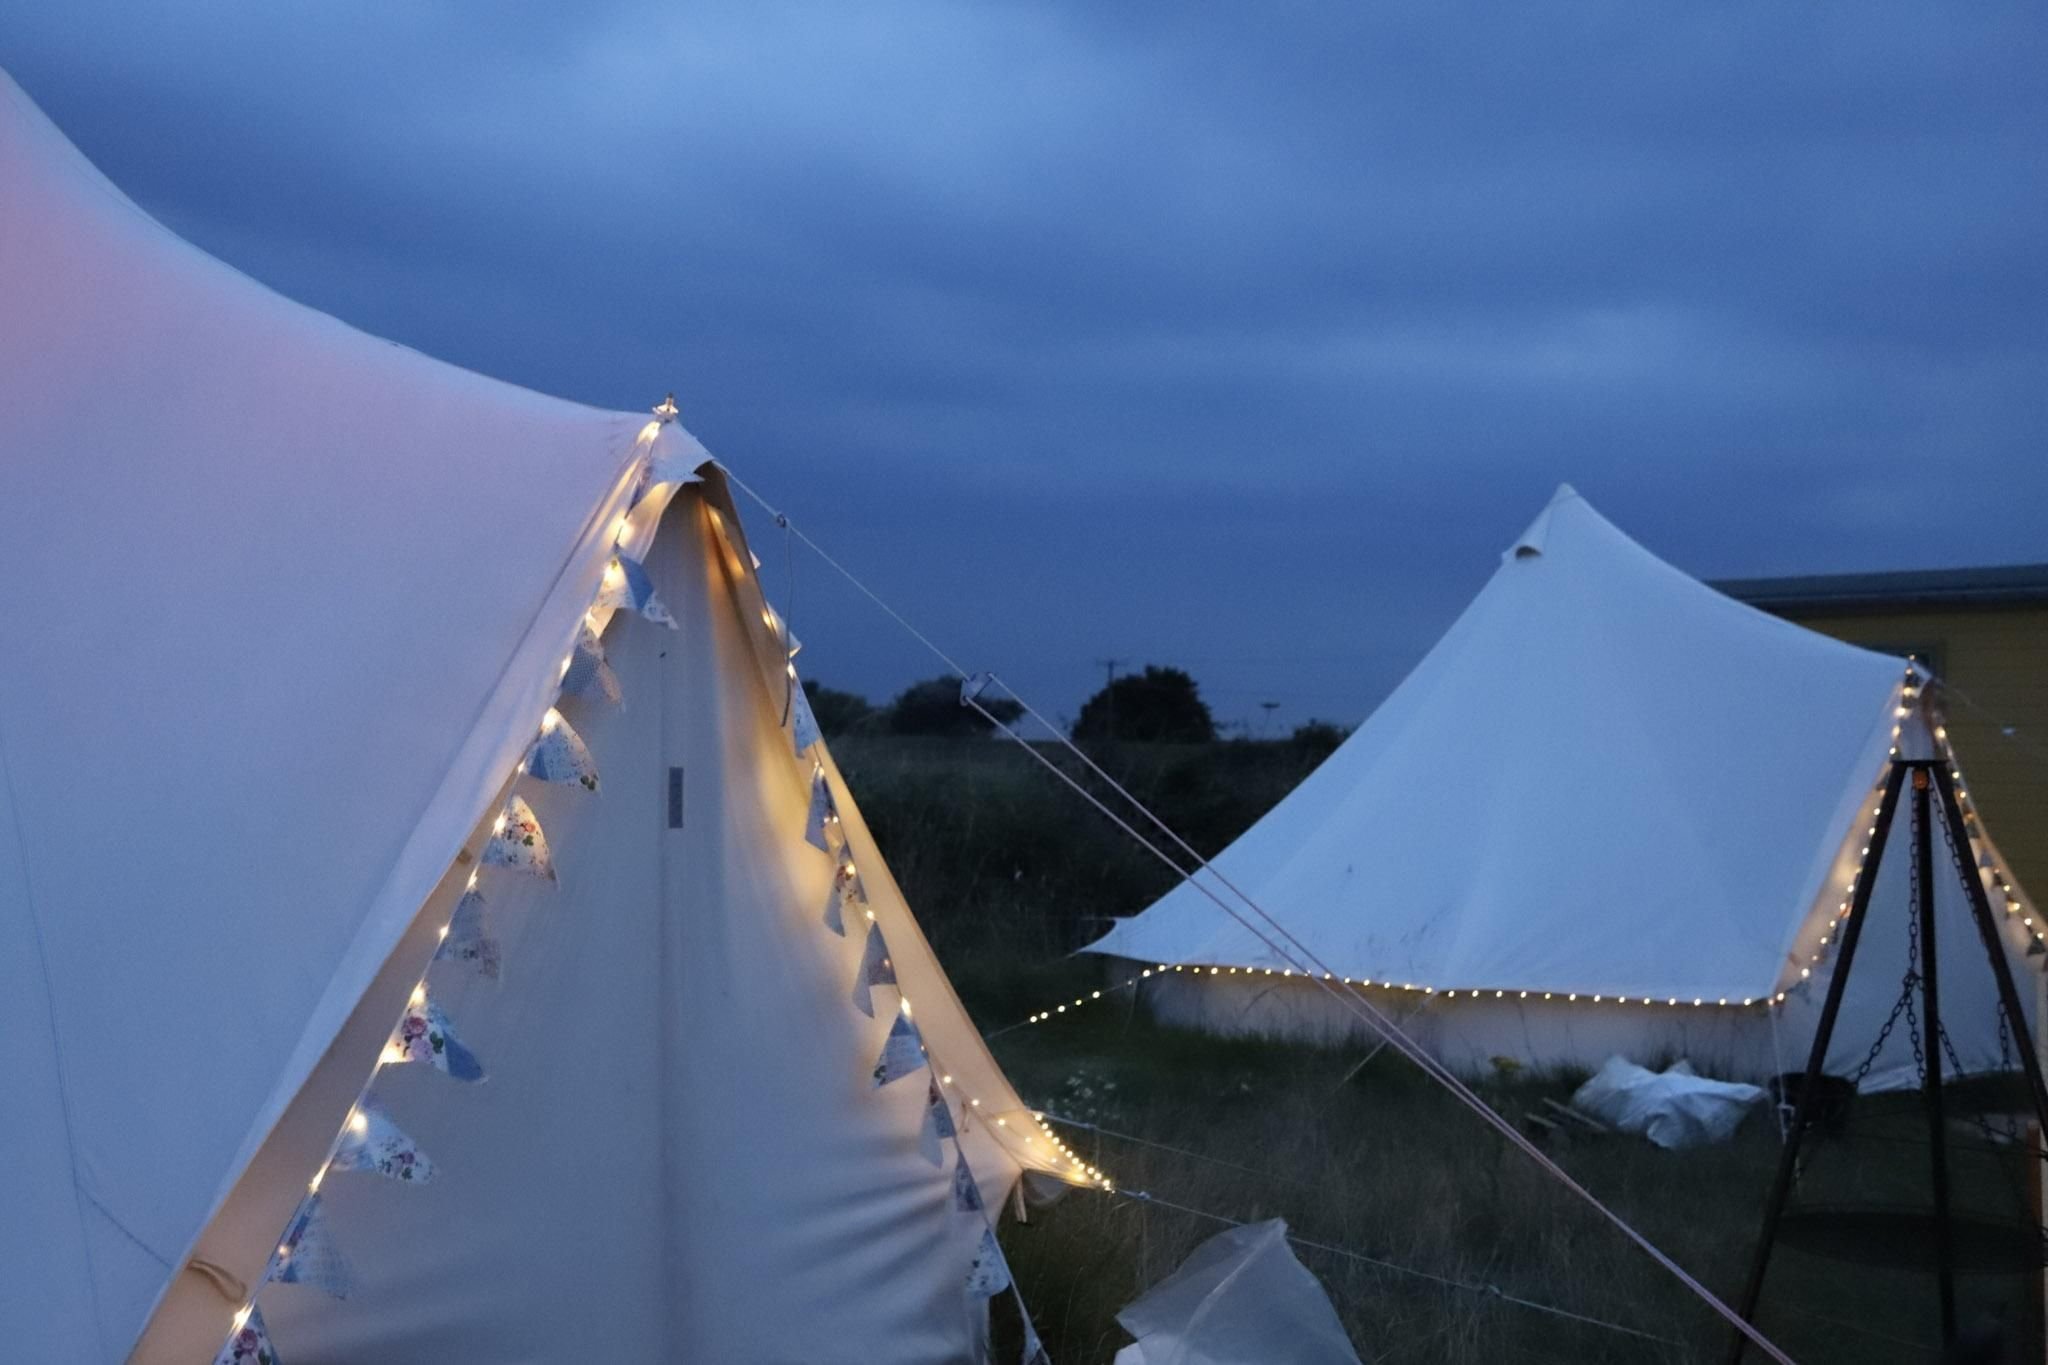 Two bell tents lit up with fairy lights at dusk